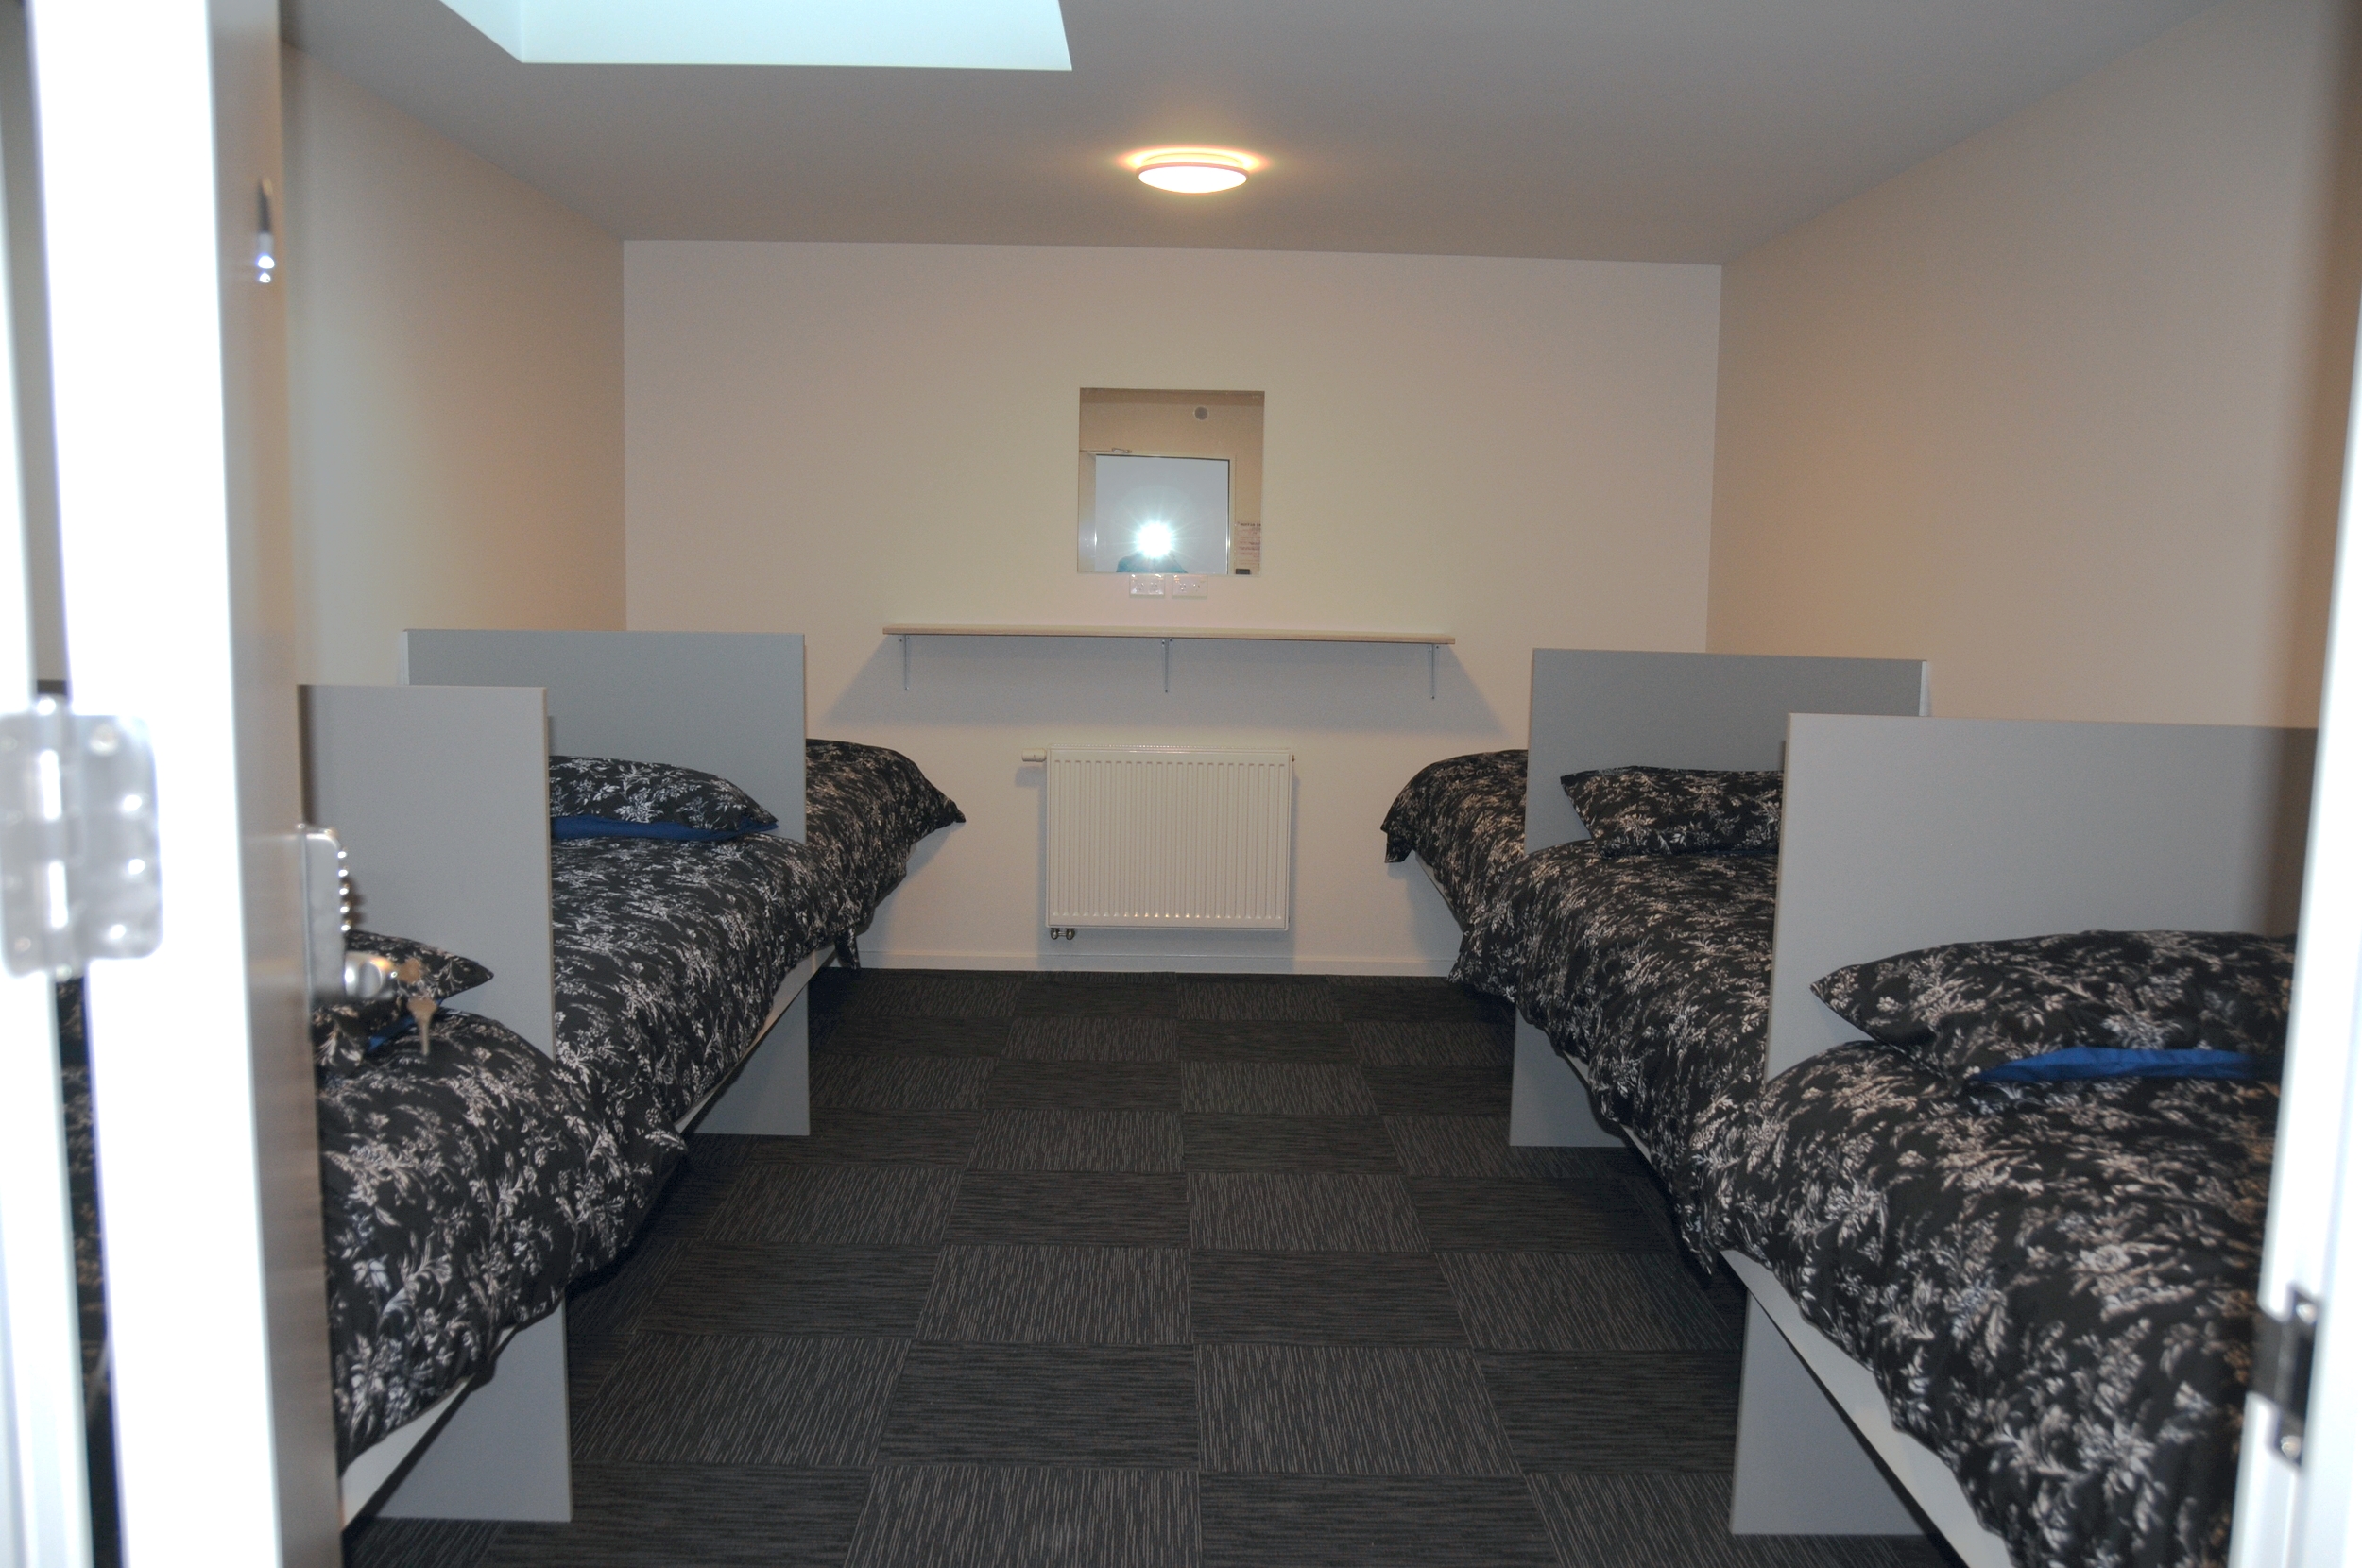 One of three six-bed rooms available in the facility